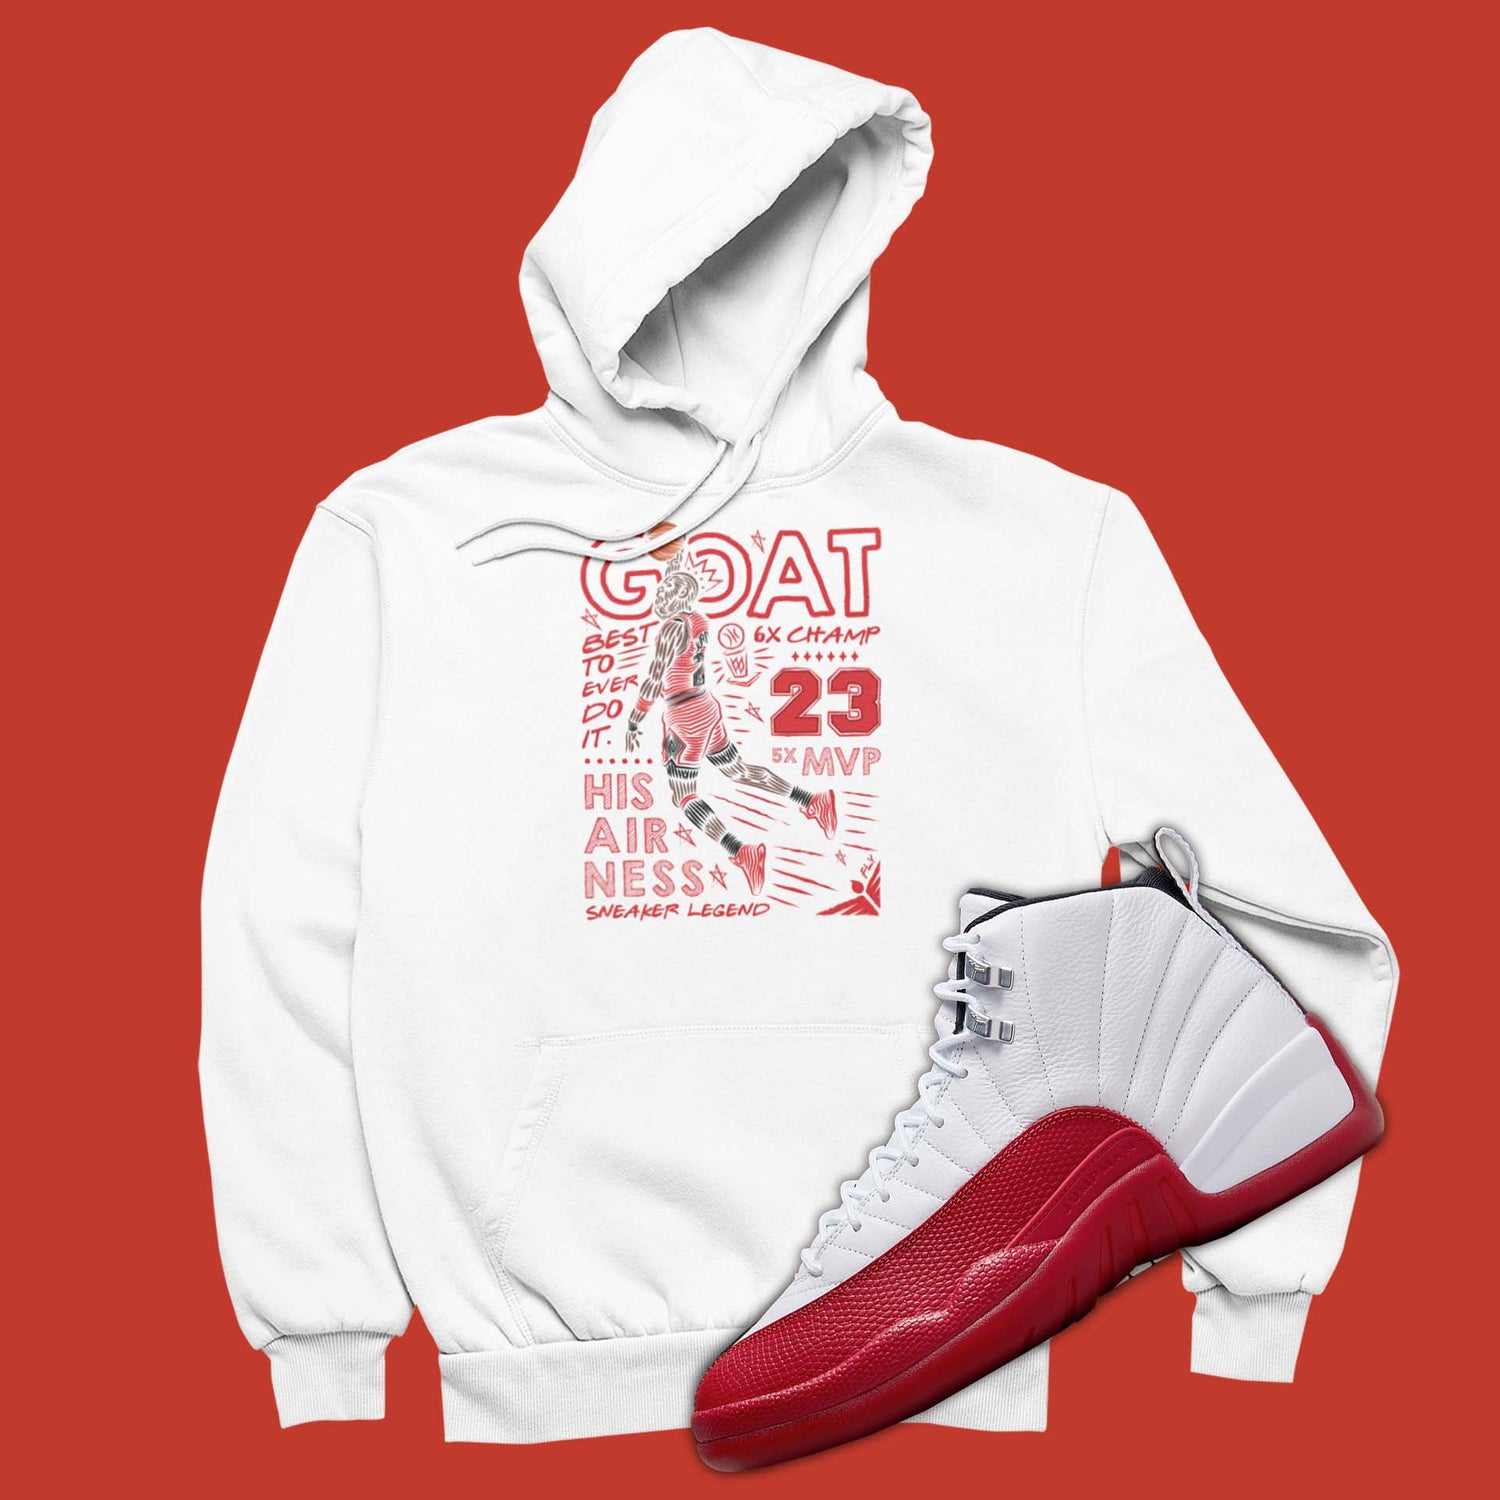 This sneaker match hoodie is the perfect sweatshirt to match your Air Jordan 12 Cherry.